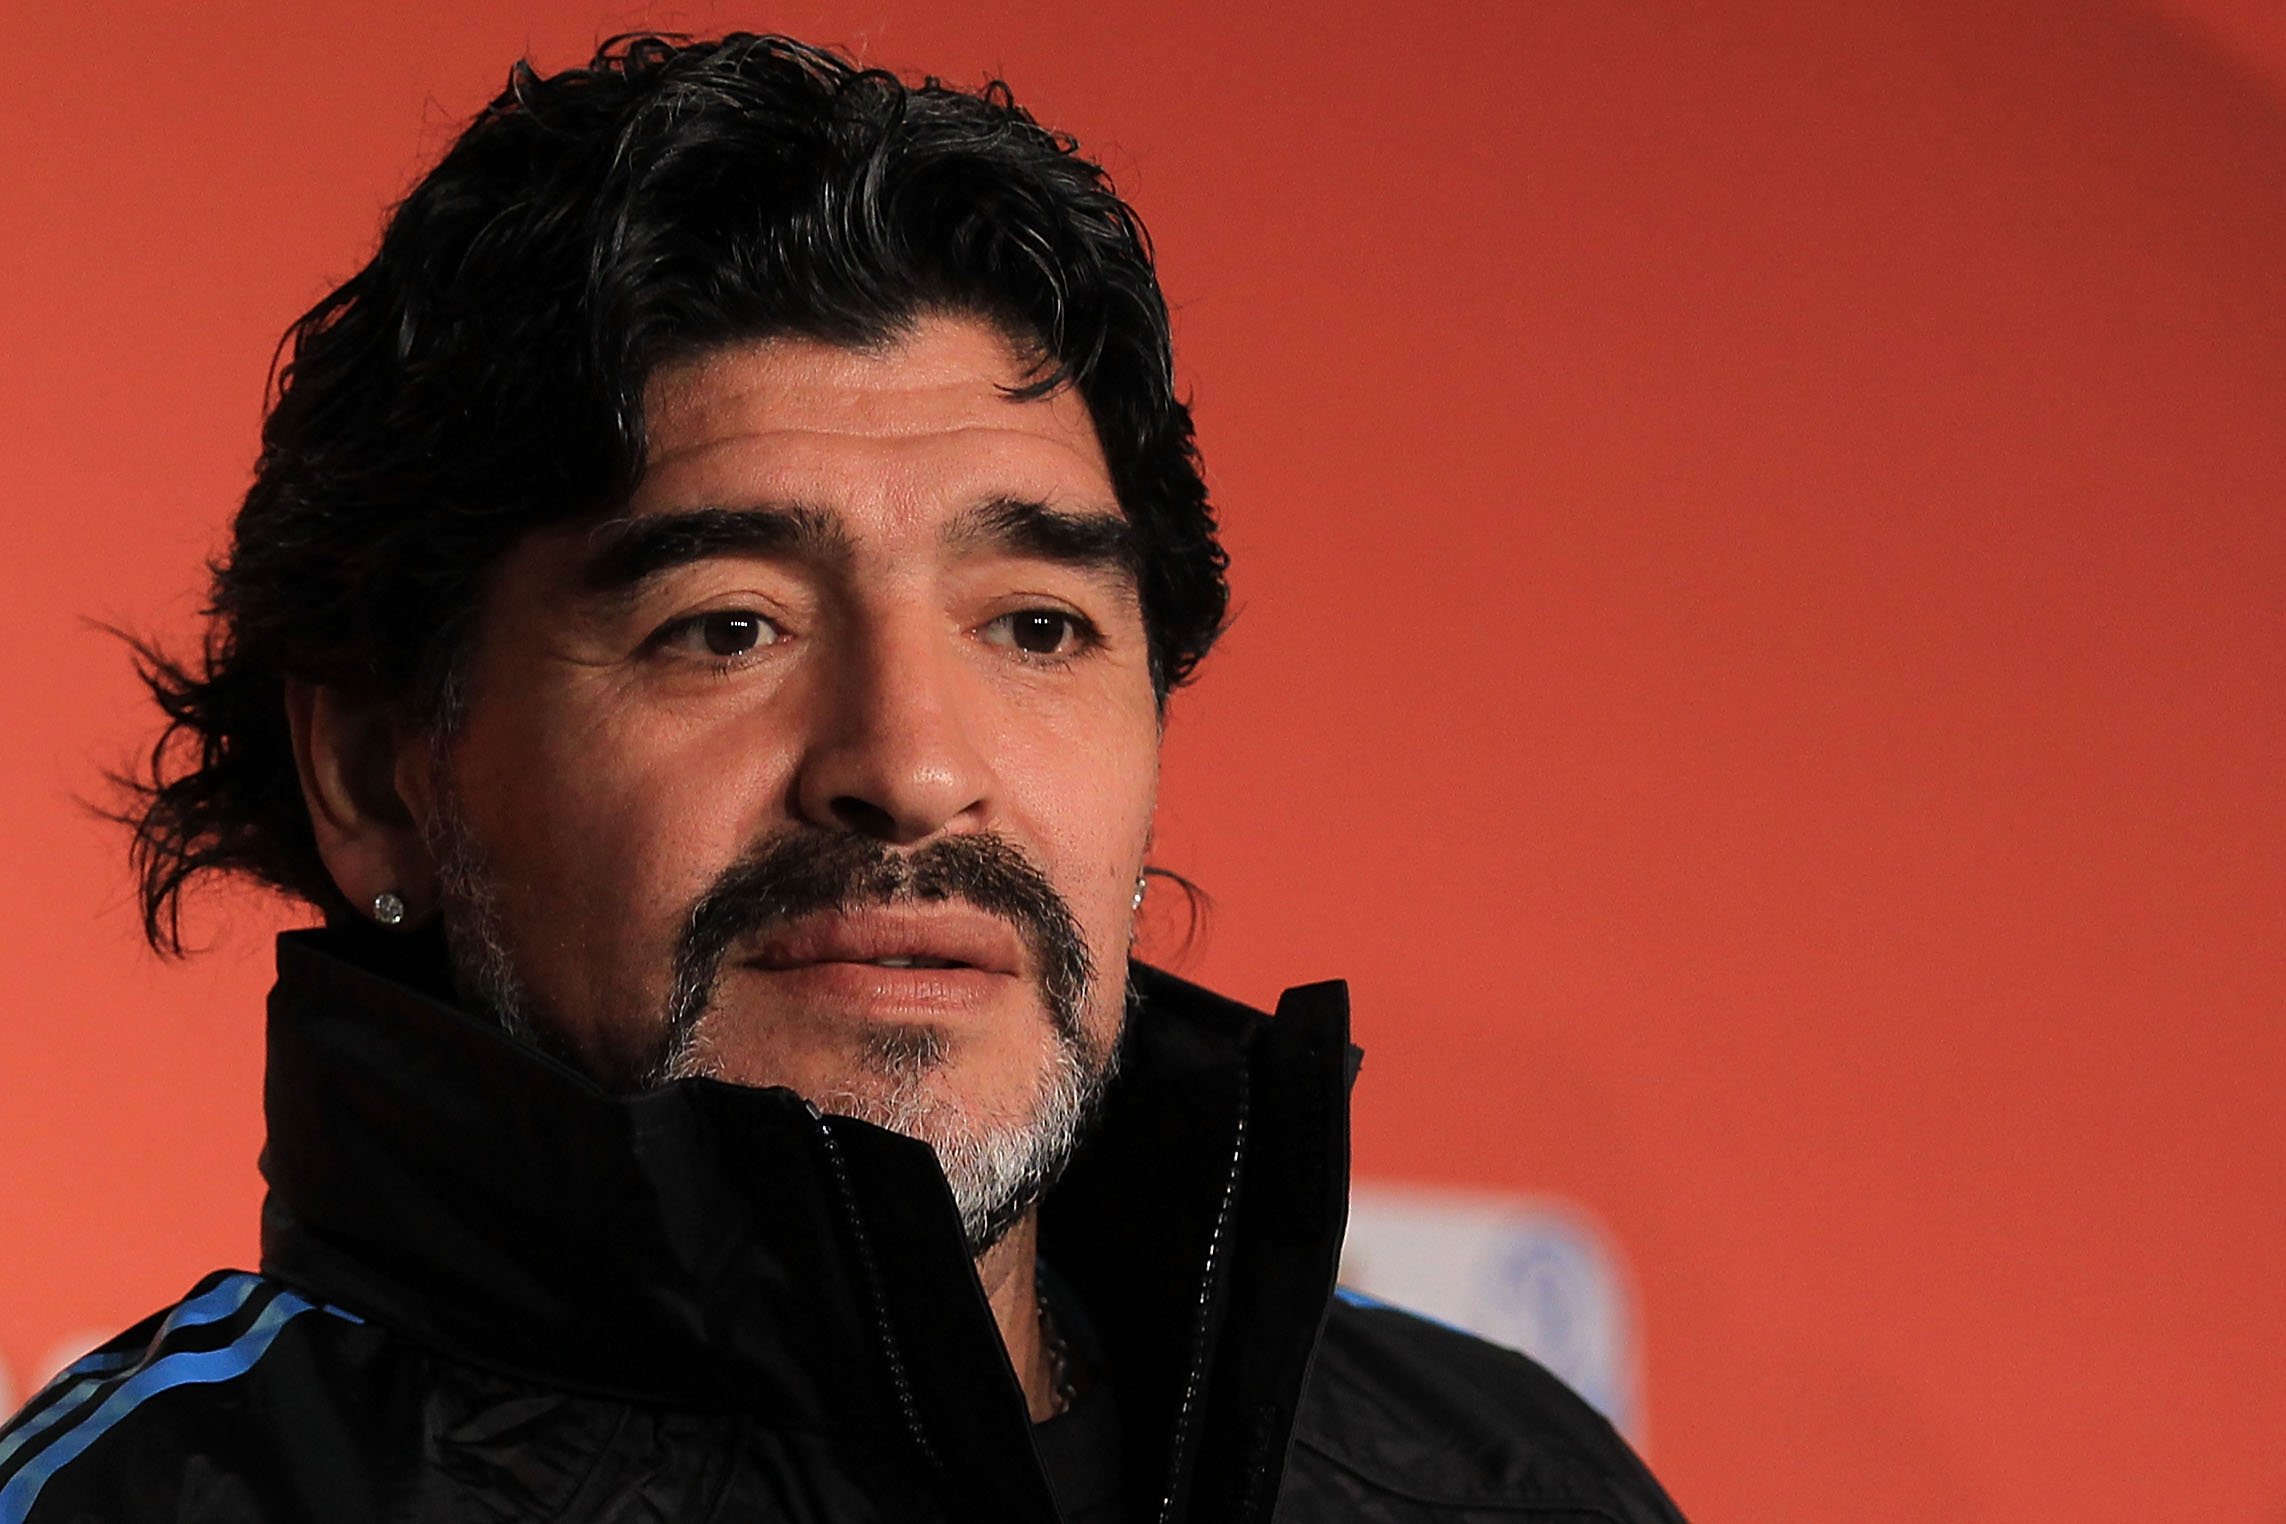 Diego Maradona speaks to the media during a press conference at Green Point Arena on July 2, 2010, in Cape Town, South Africa | Photo: Chris McGrath/Getty Images